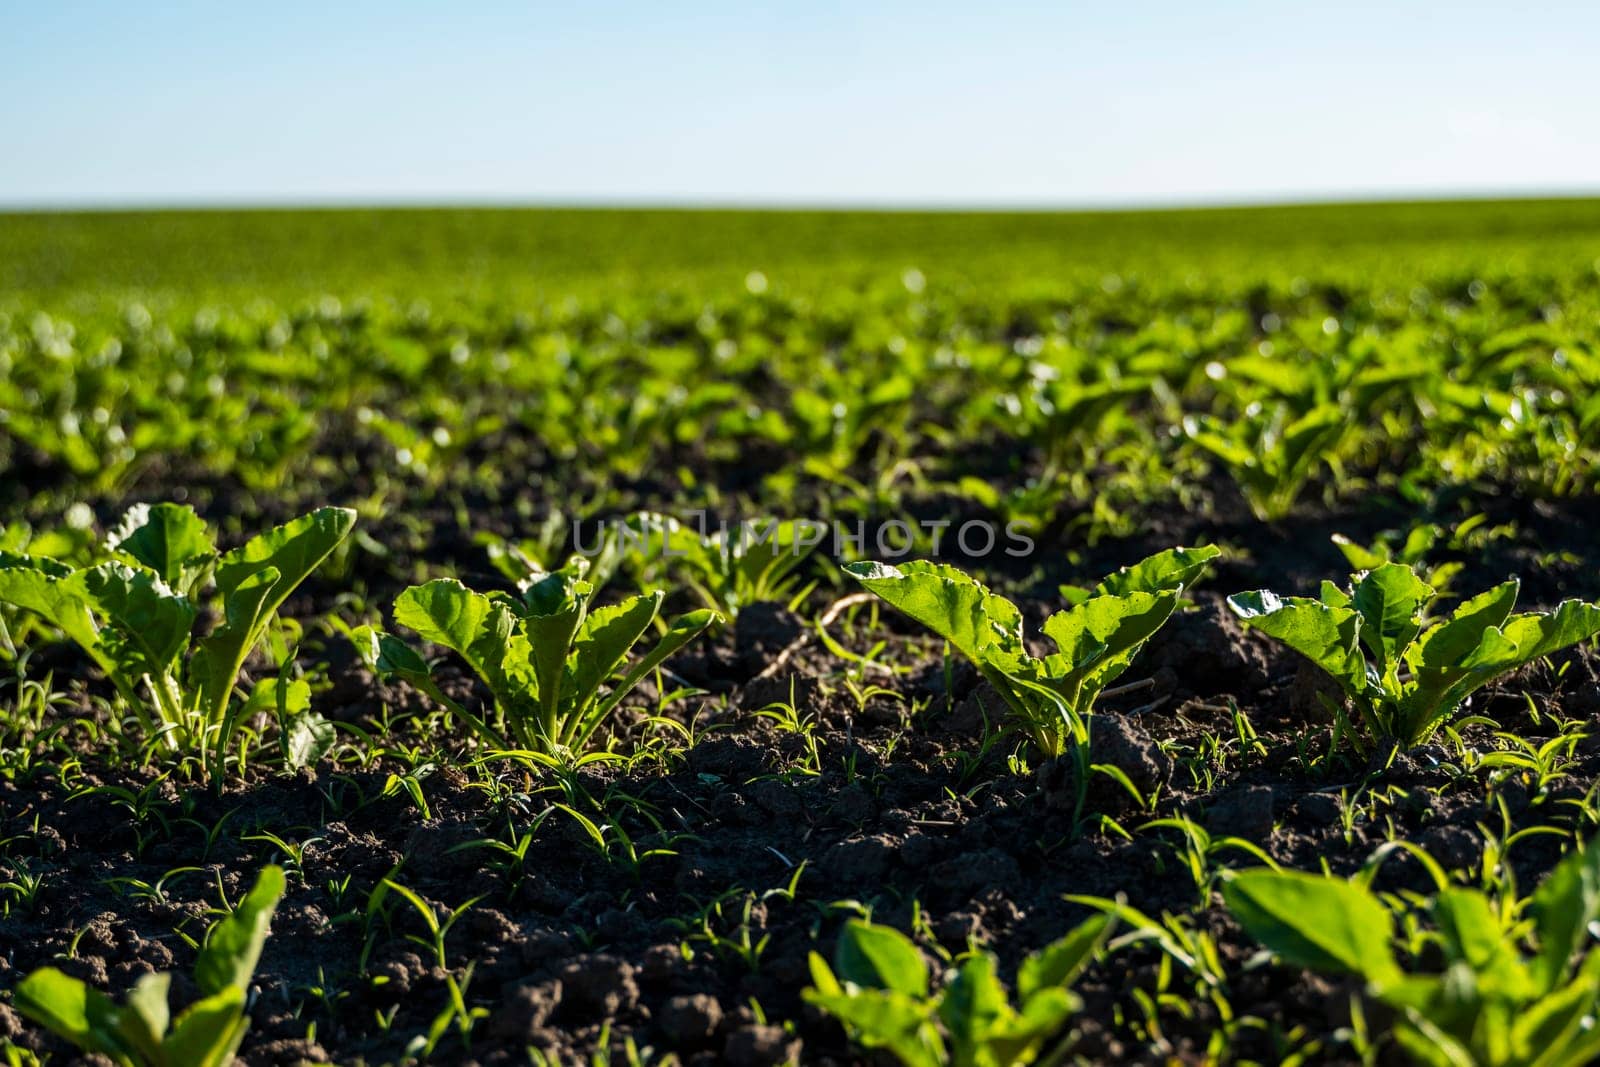 Agriculture concept. Close-up of young sugar beet plants grows in converging long rows in a fertile soil. Agricultural field